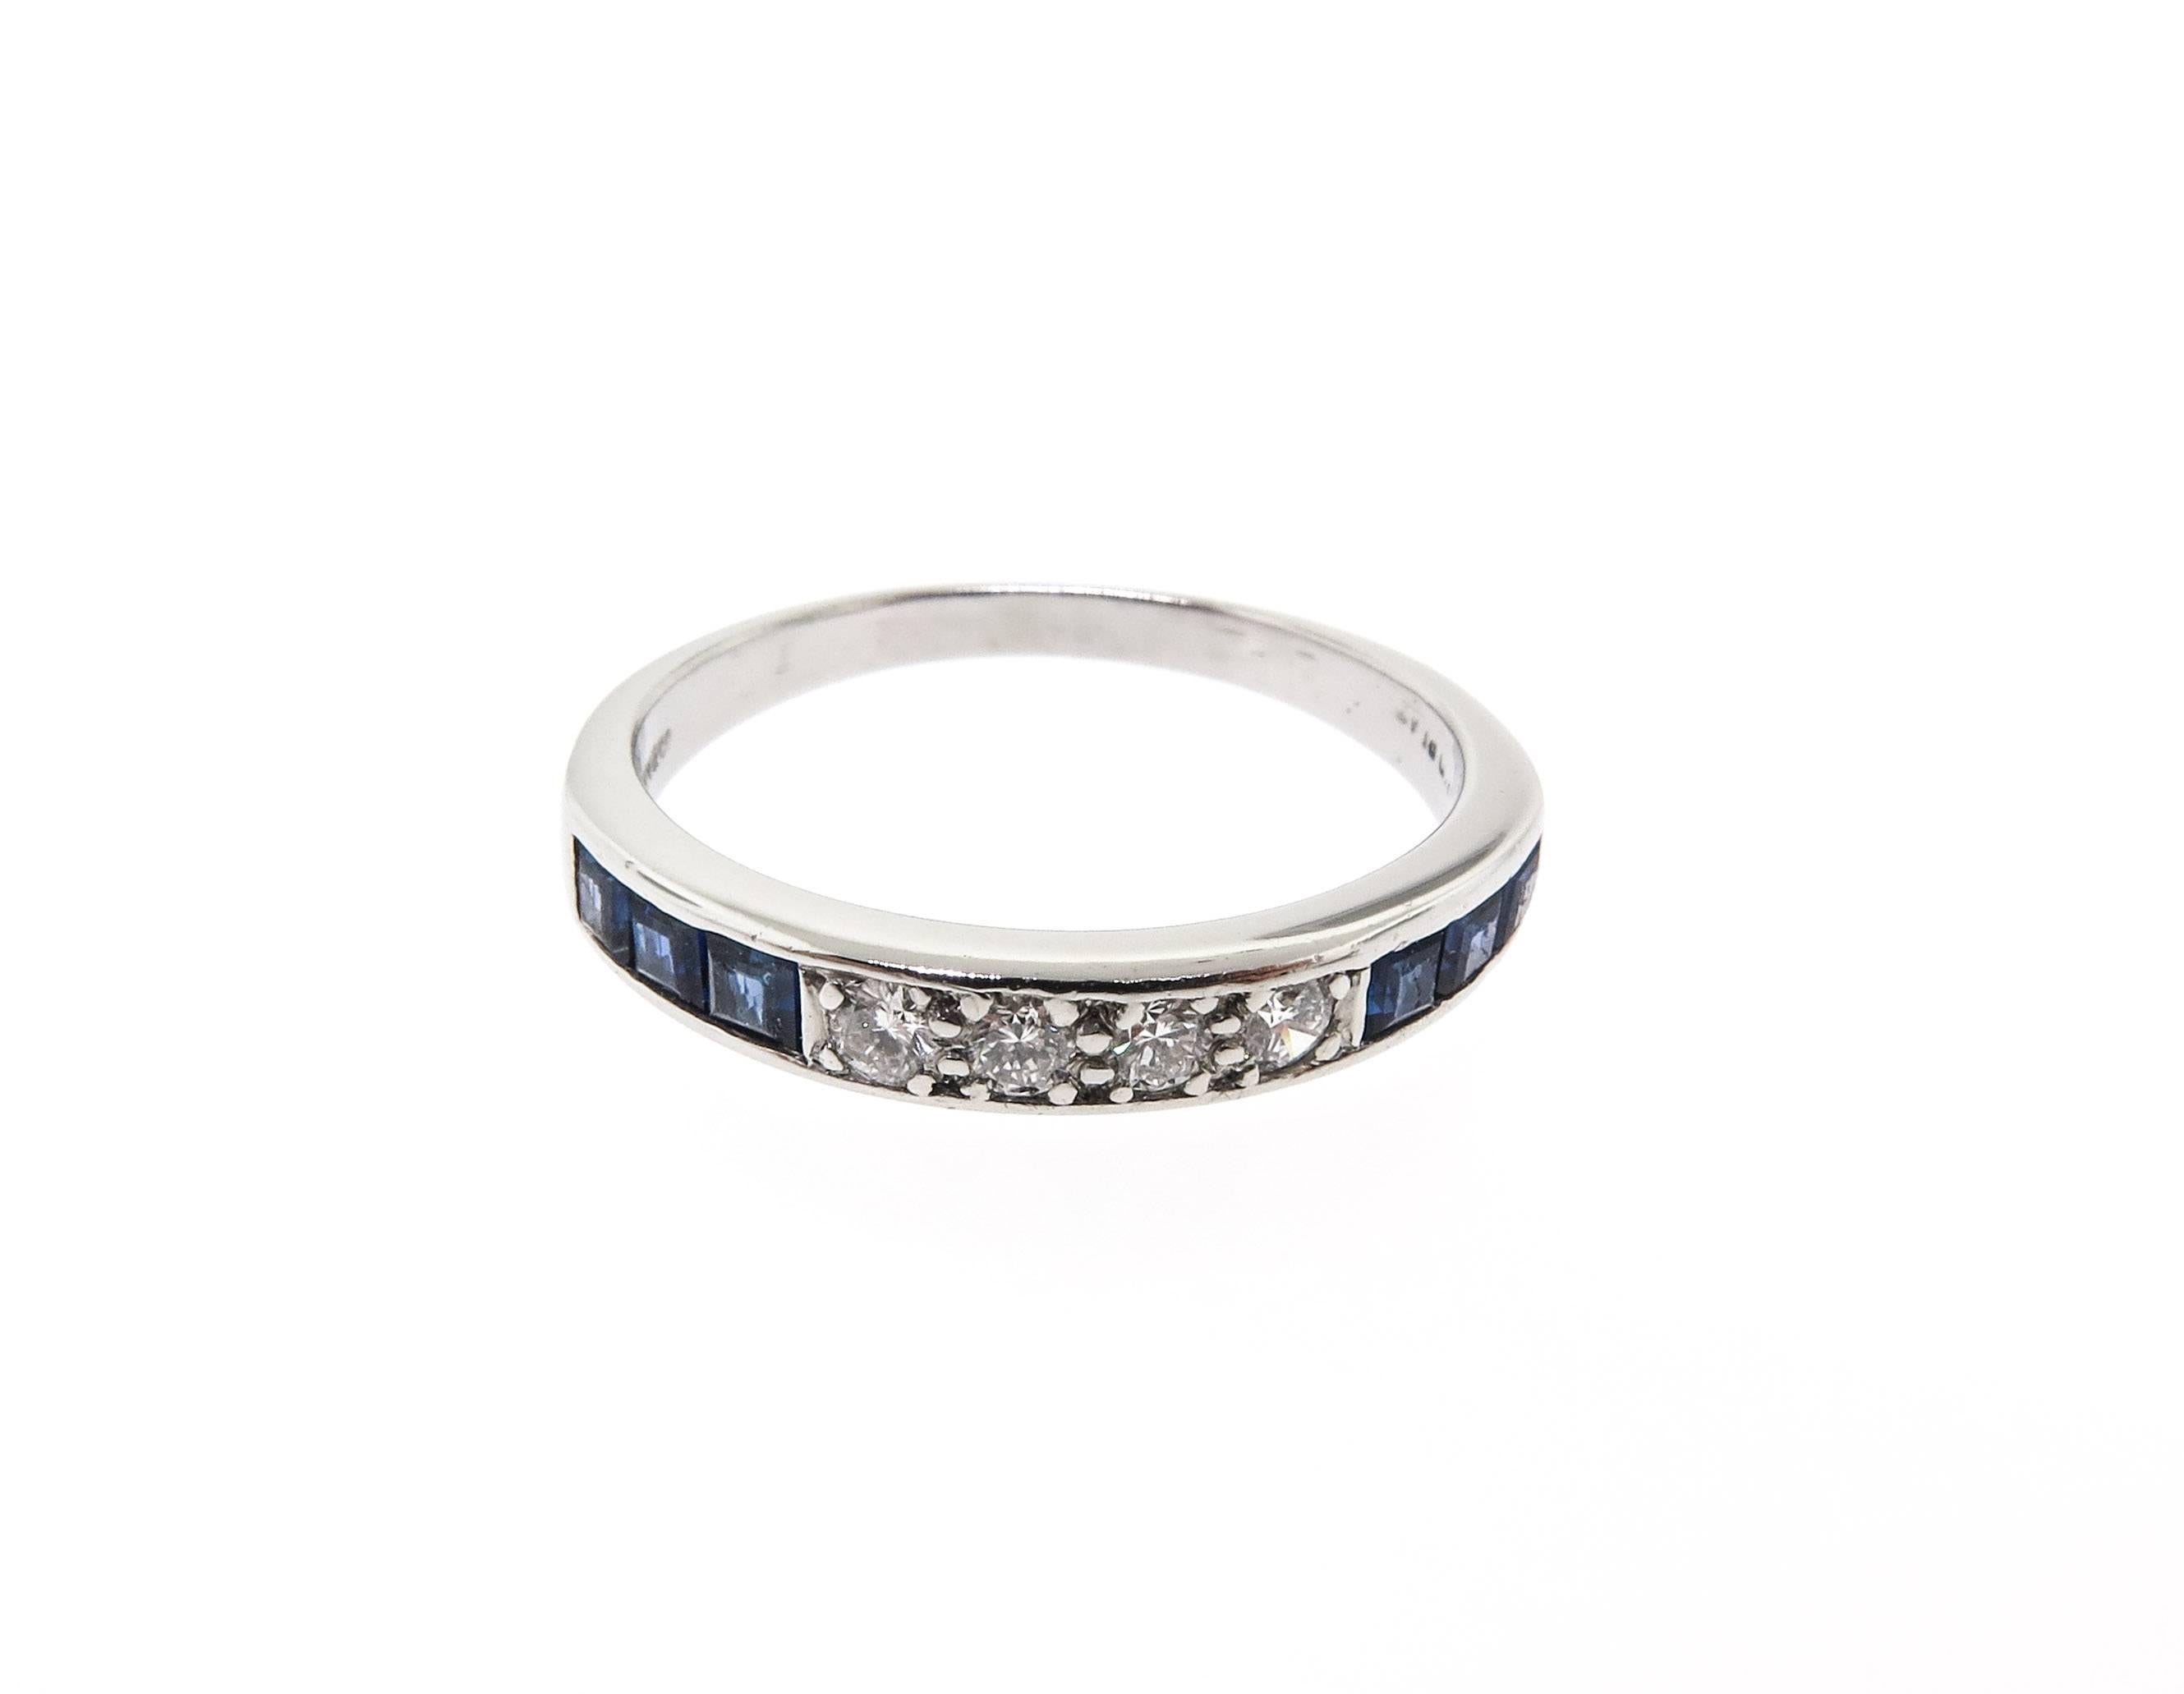 Sapphire and diamond band ring, showcasing 6 square-cut sapphires alternating with round brilliant-cut diamonds at the center of the band, the gemstones are channel-set in high-polished platinum. Diamonds weighing 0.08 total carats and sapphires